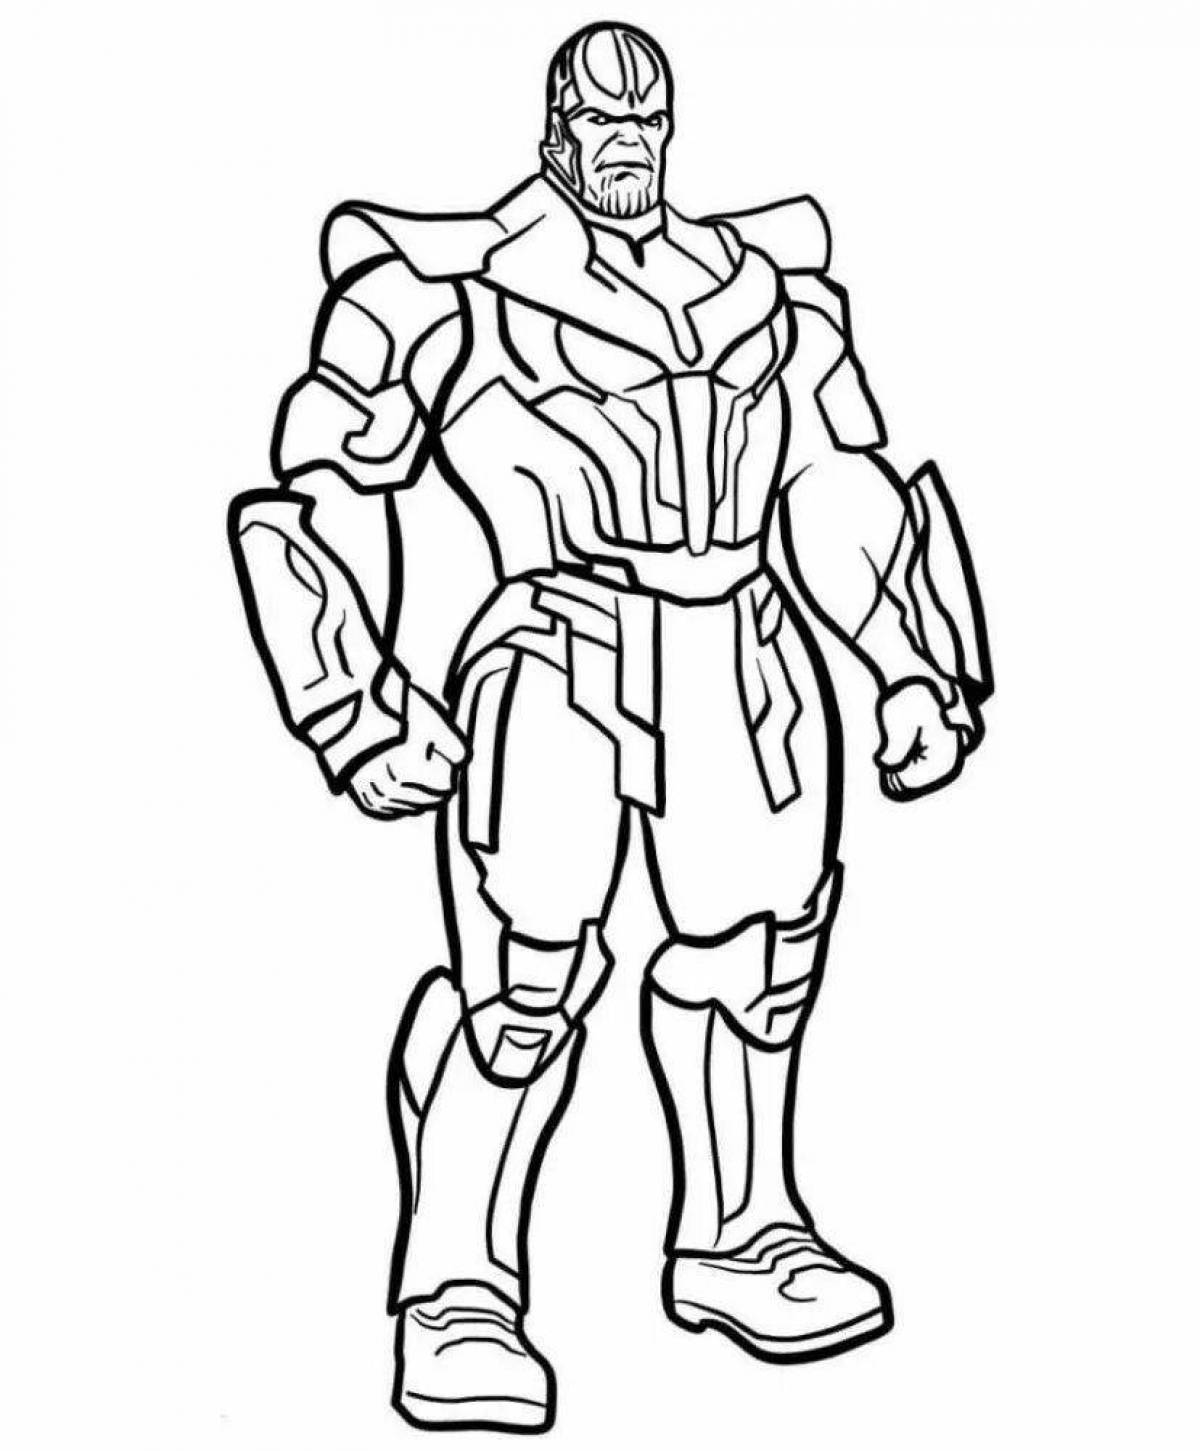 Awesome thanos coloring page